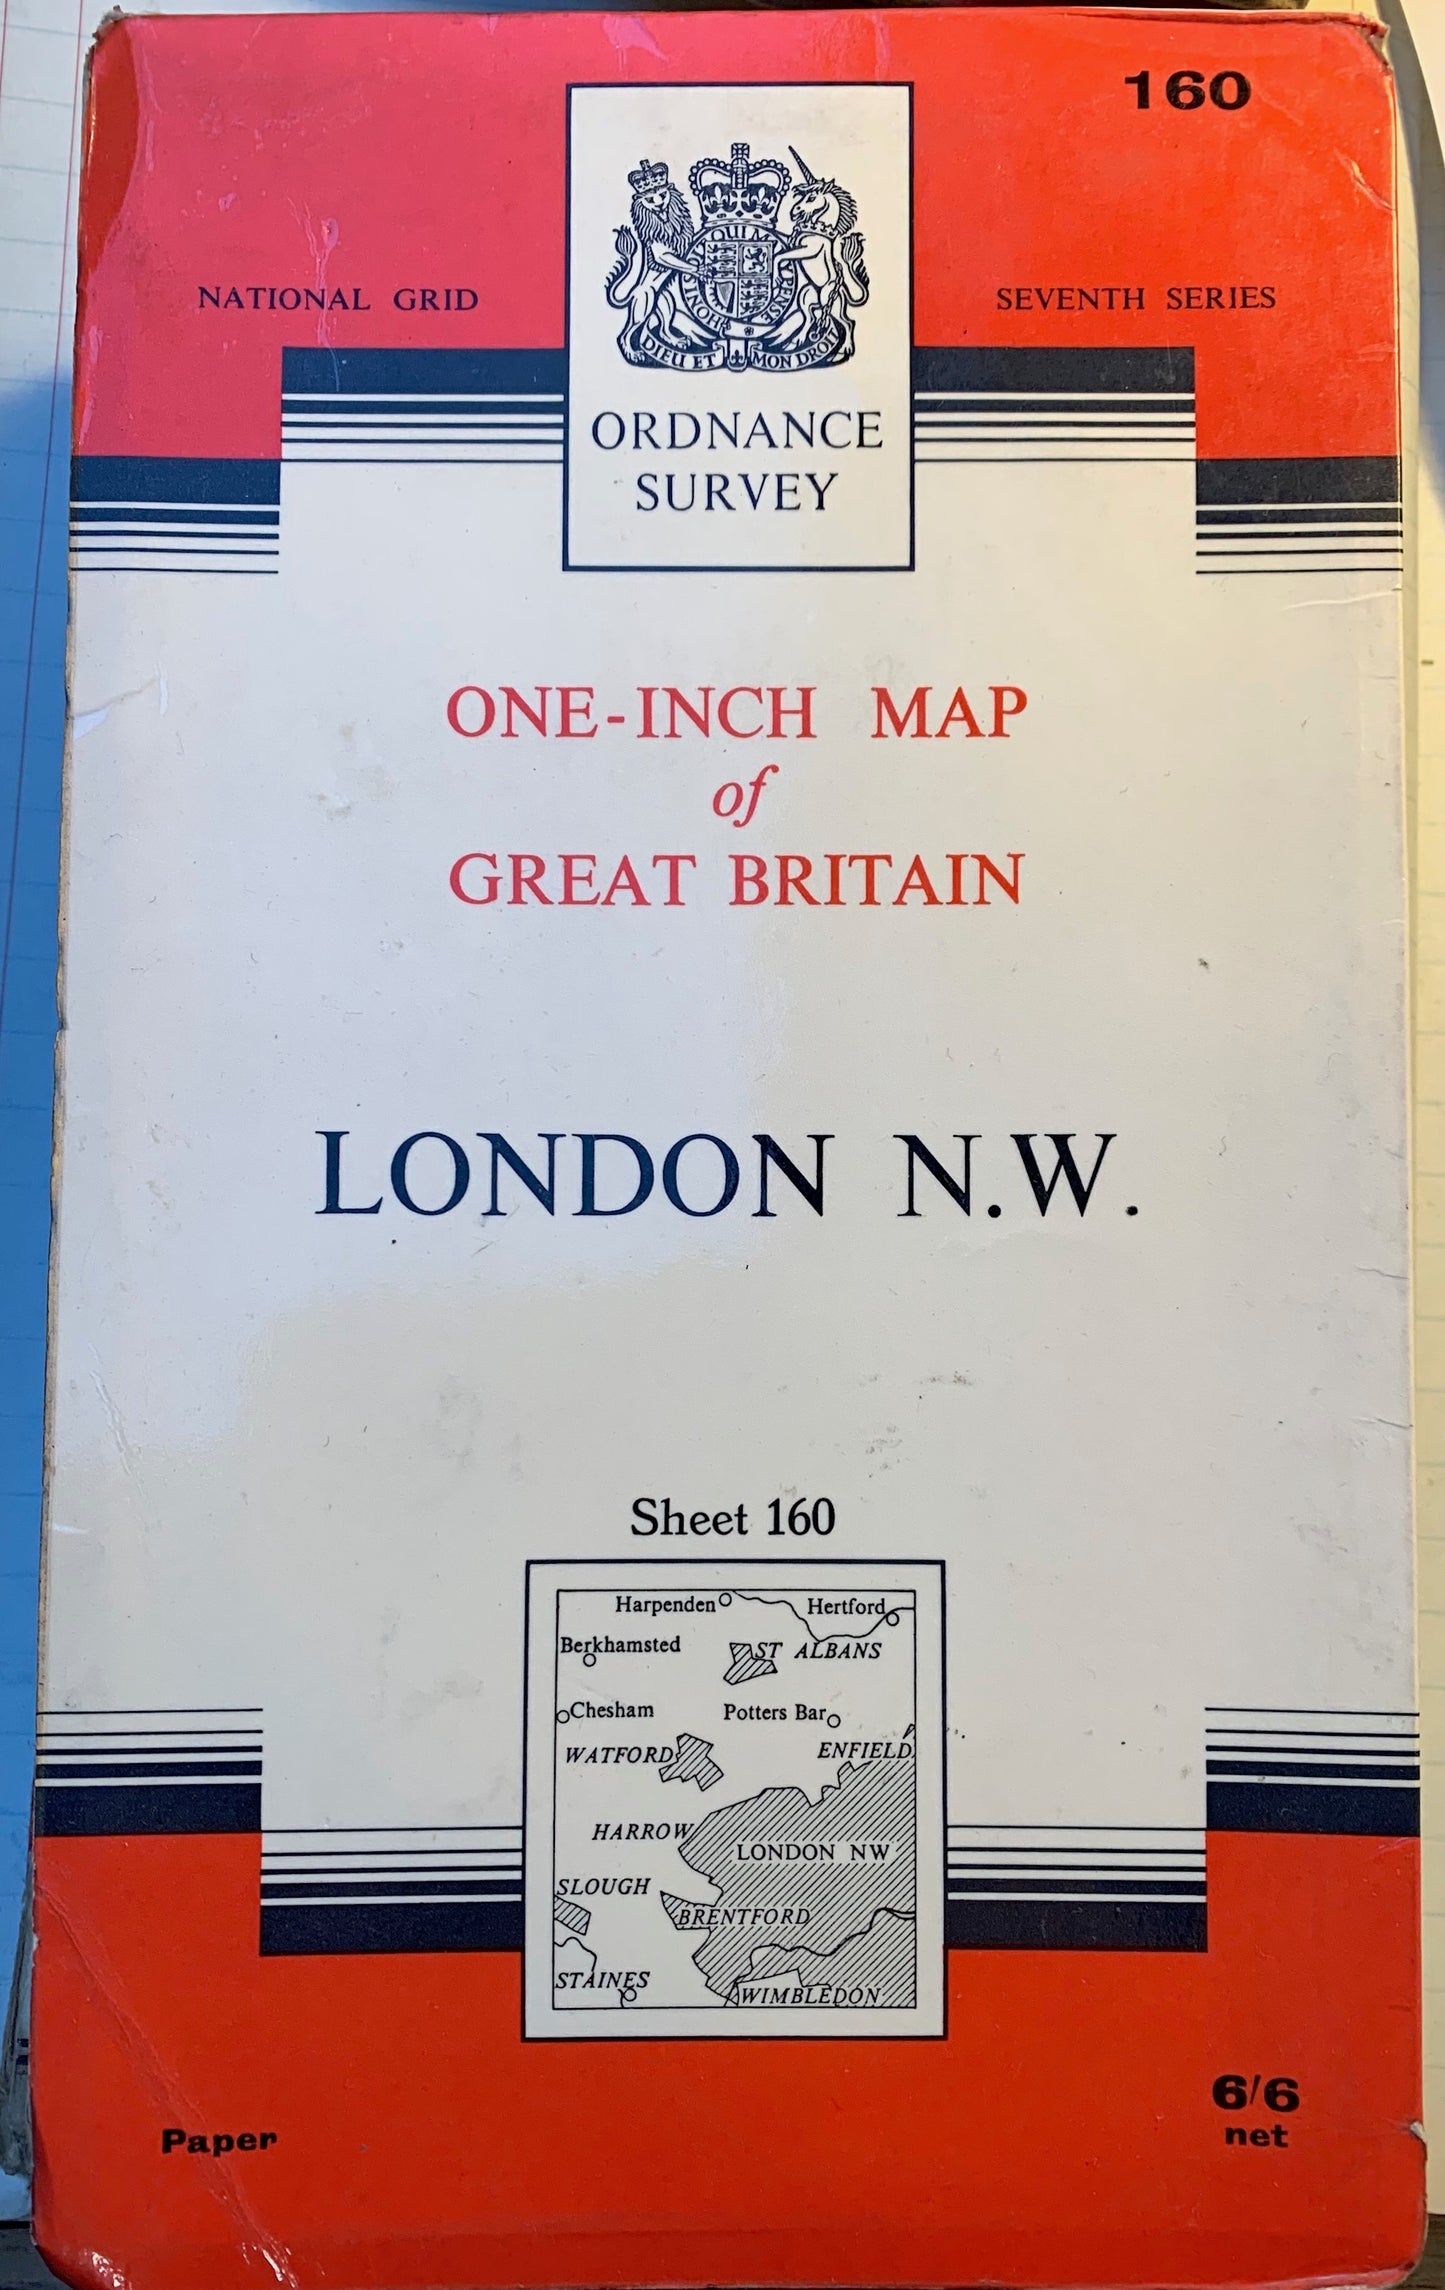 Fascinating 1940s and 50s ORDNANCE SURVEY MAPS of N.W. LONDON, Middlesex + Hertfordshire 1" to 1 Mile